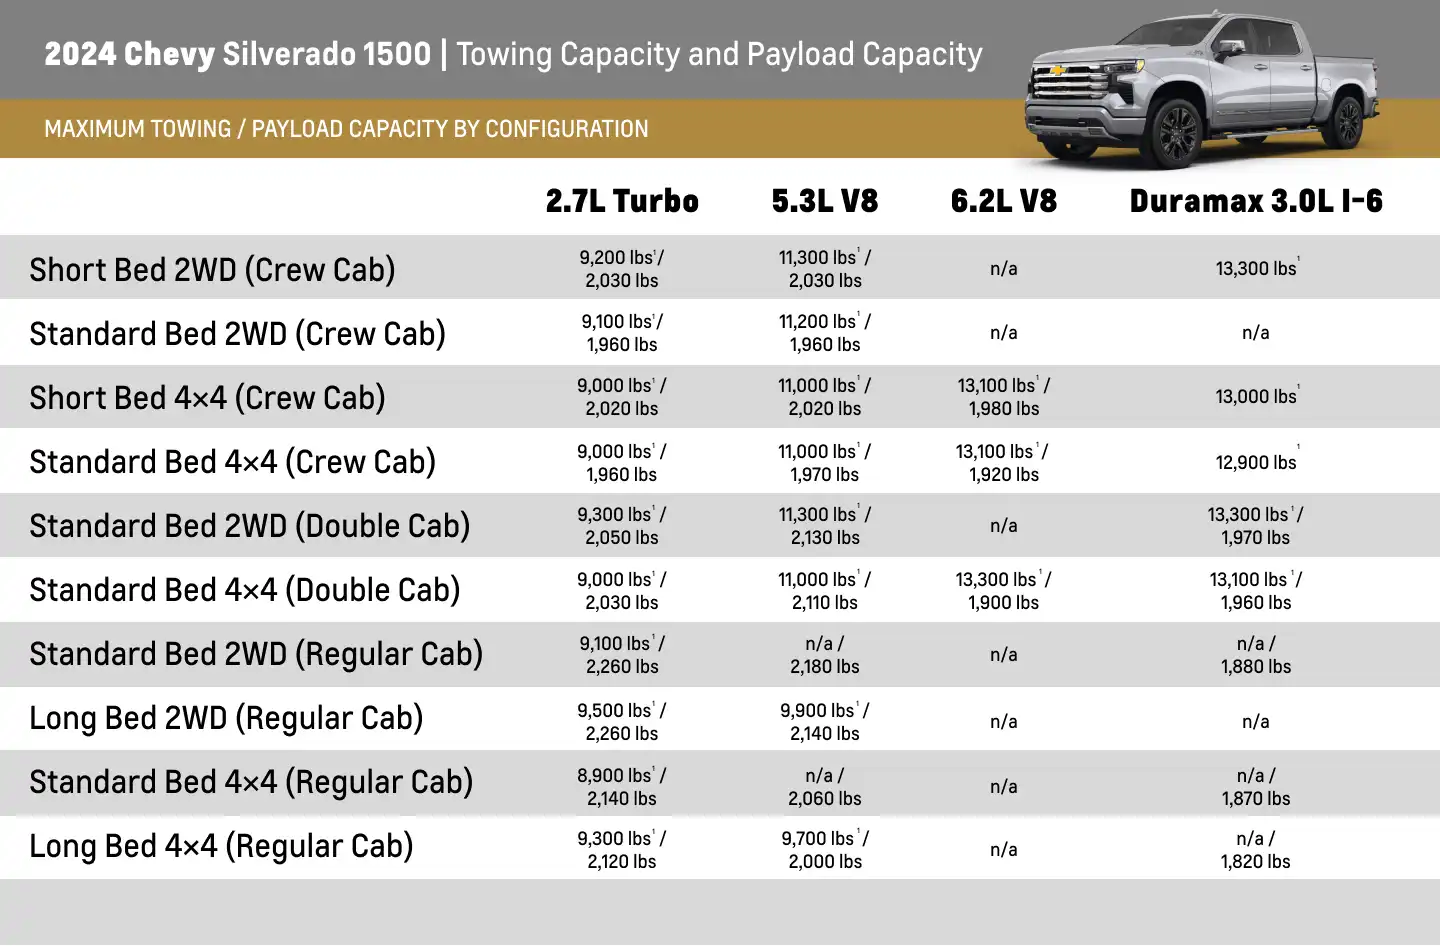 2024 Chevy Silverado 1500 Towing Capacity Chart by Cabs